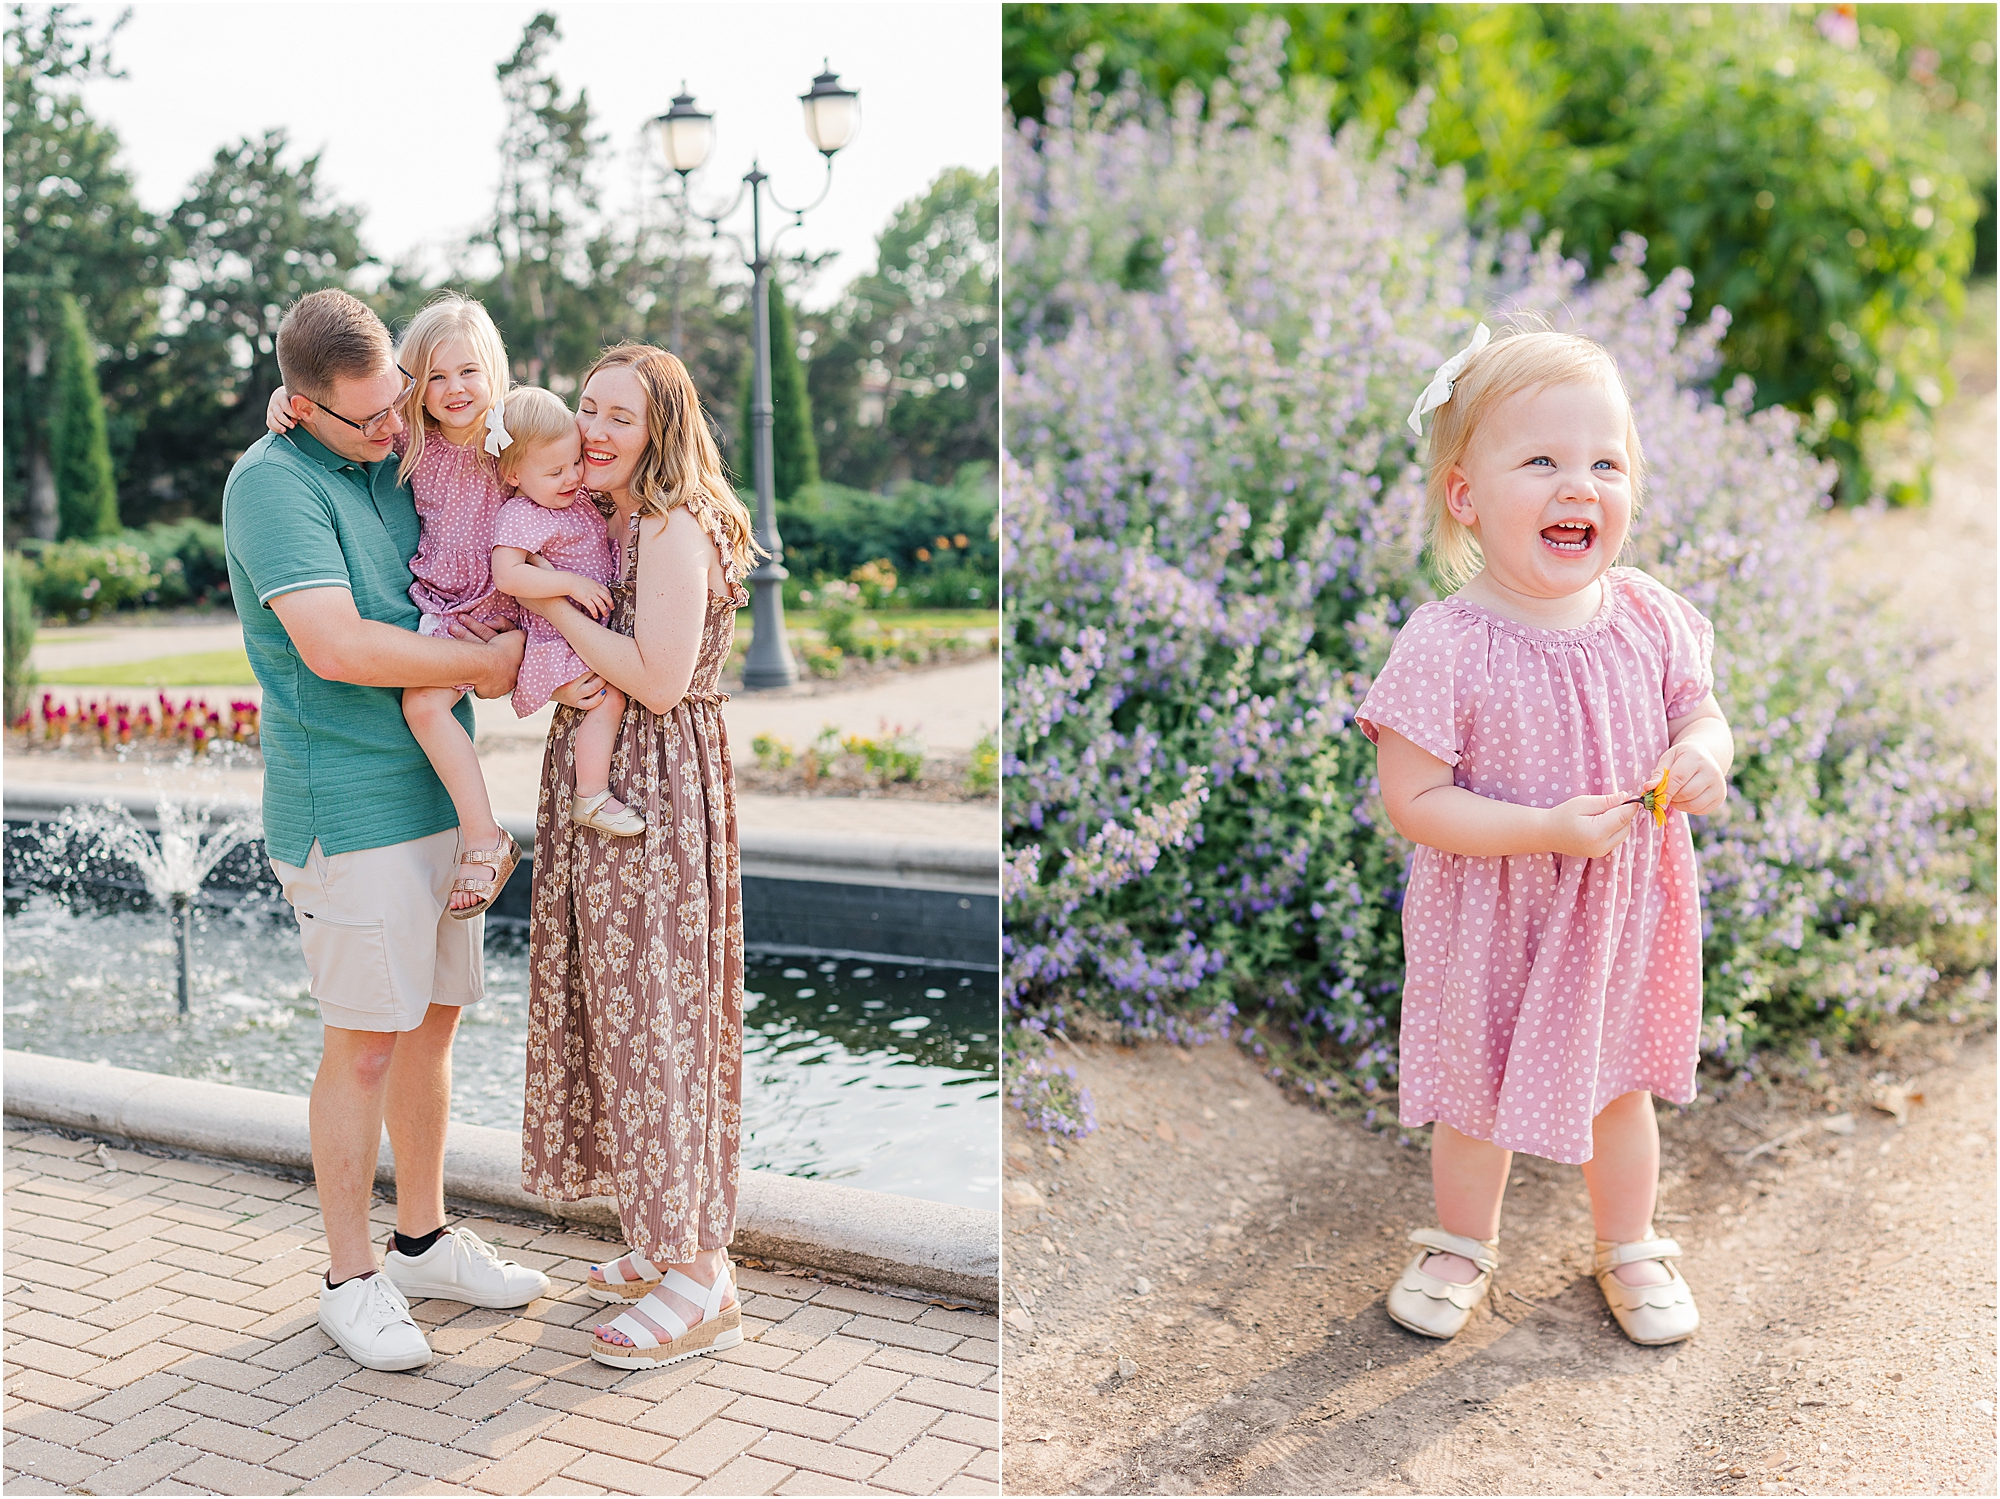 Joyful family laughing at their summer family photo session in the flower garden.